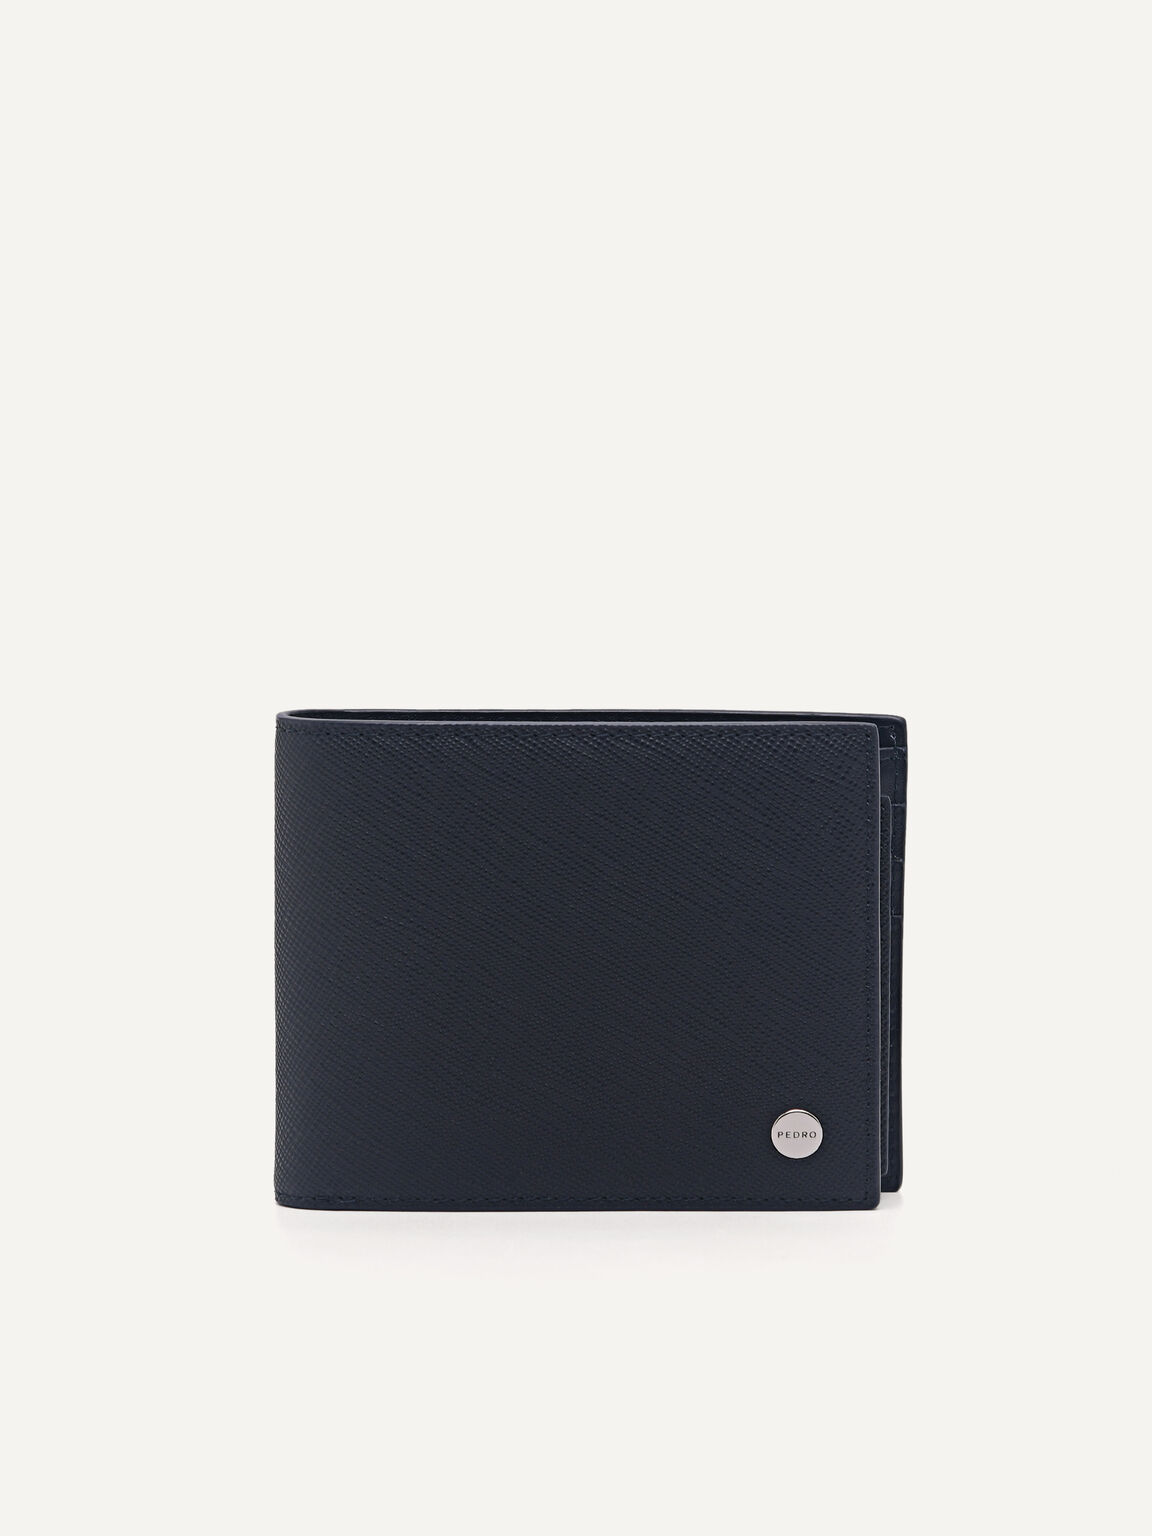 Leather Bi-Fold Wallet with Insert, Navy, hi-res